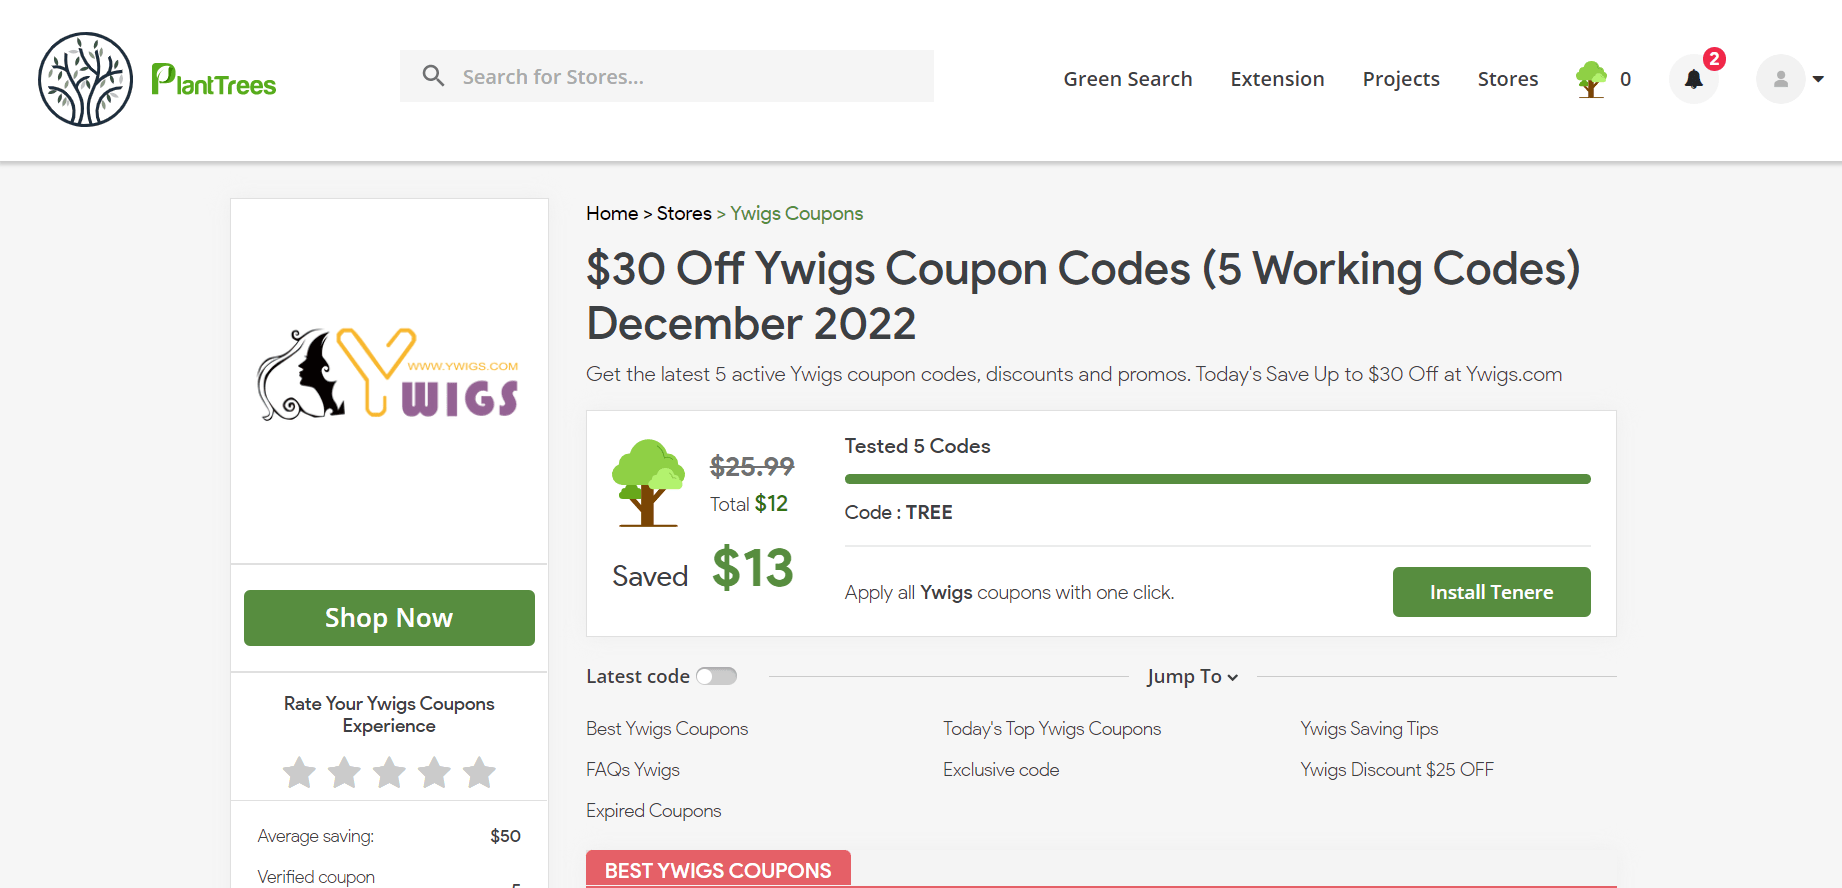 How To Use Ywigs Discount Code 2